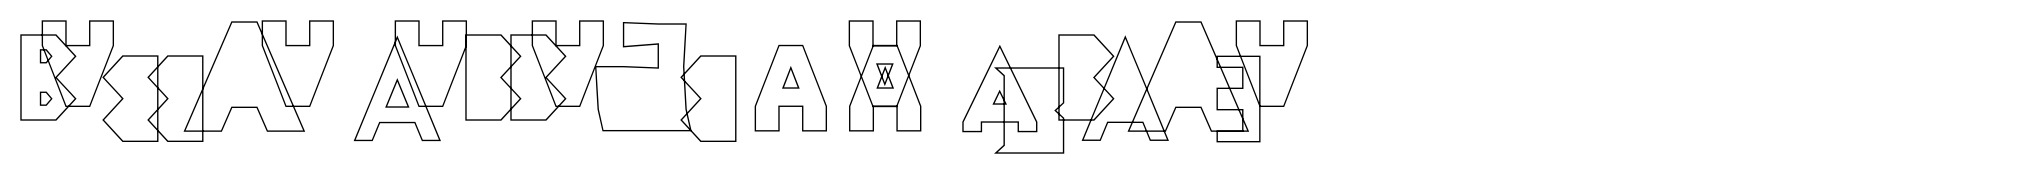 Tessie Letters ACE Outline image